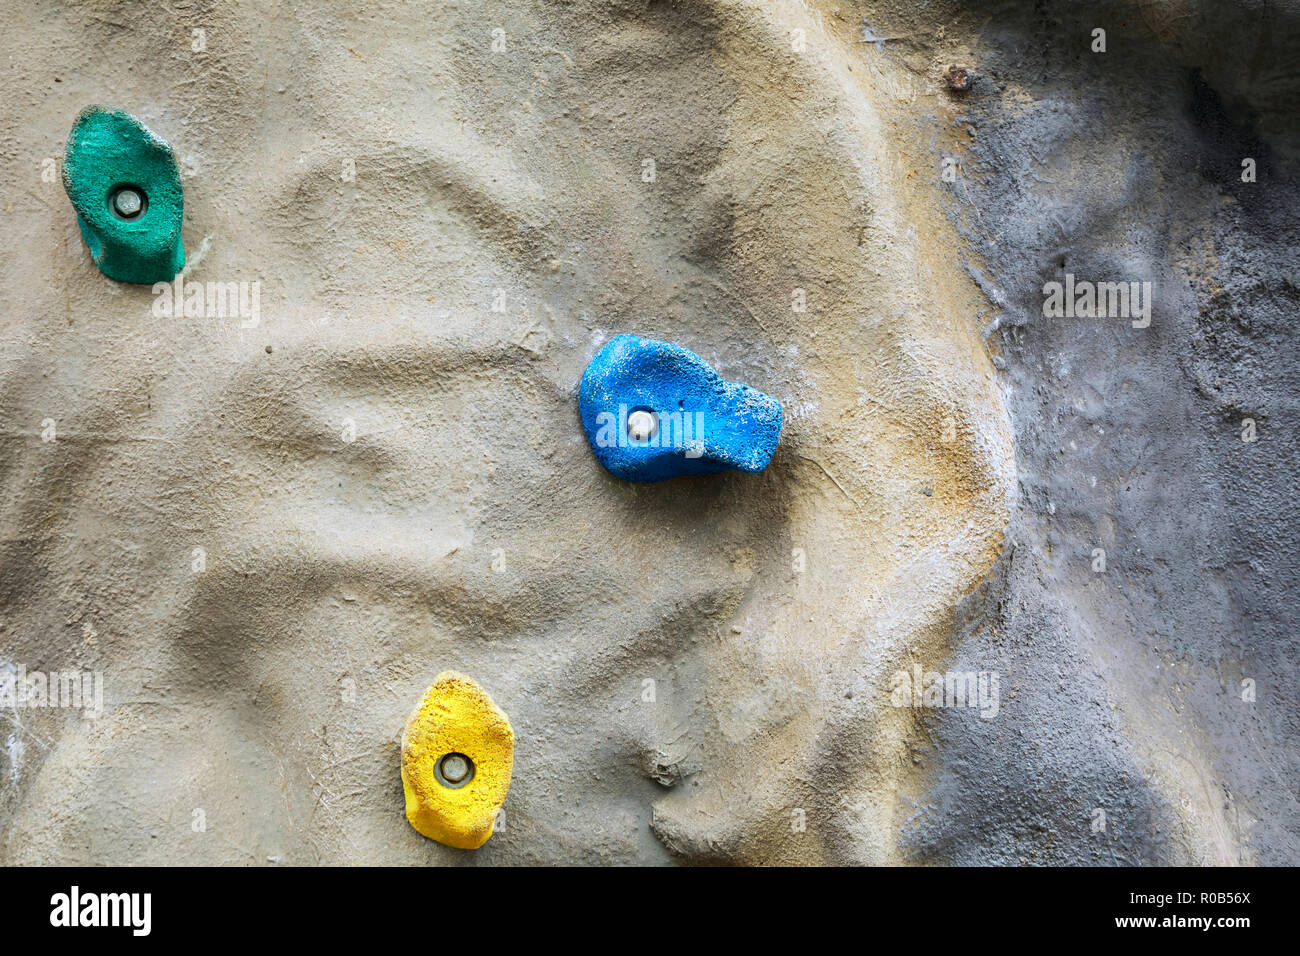 Detail of artificial climbing wall with different sized grips Stock Photo